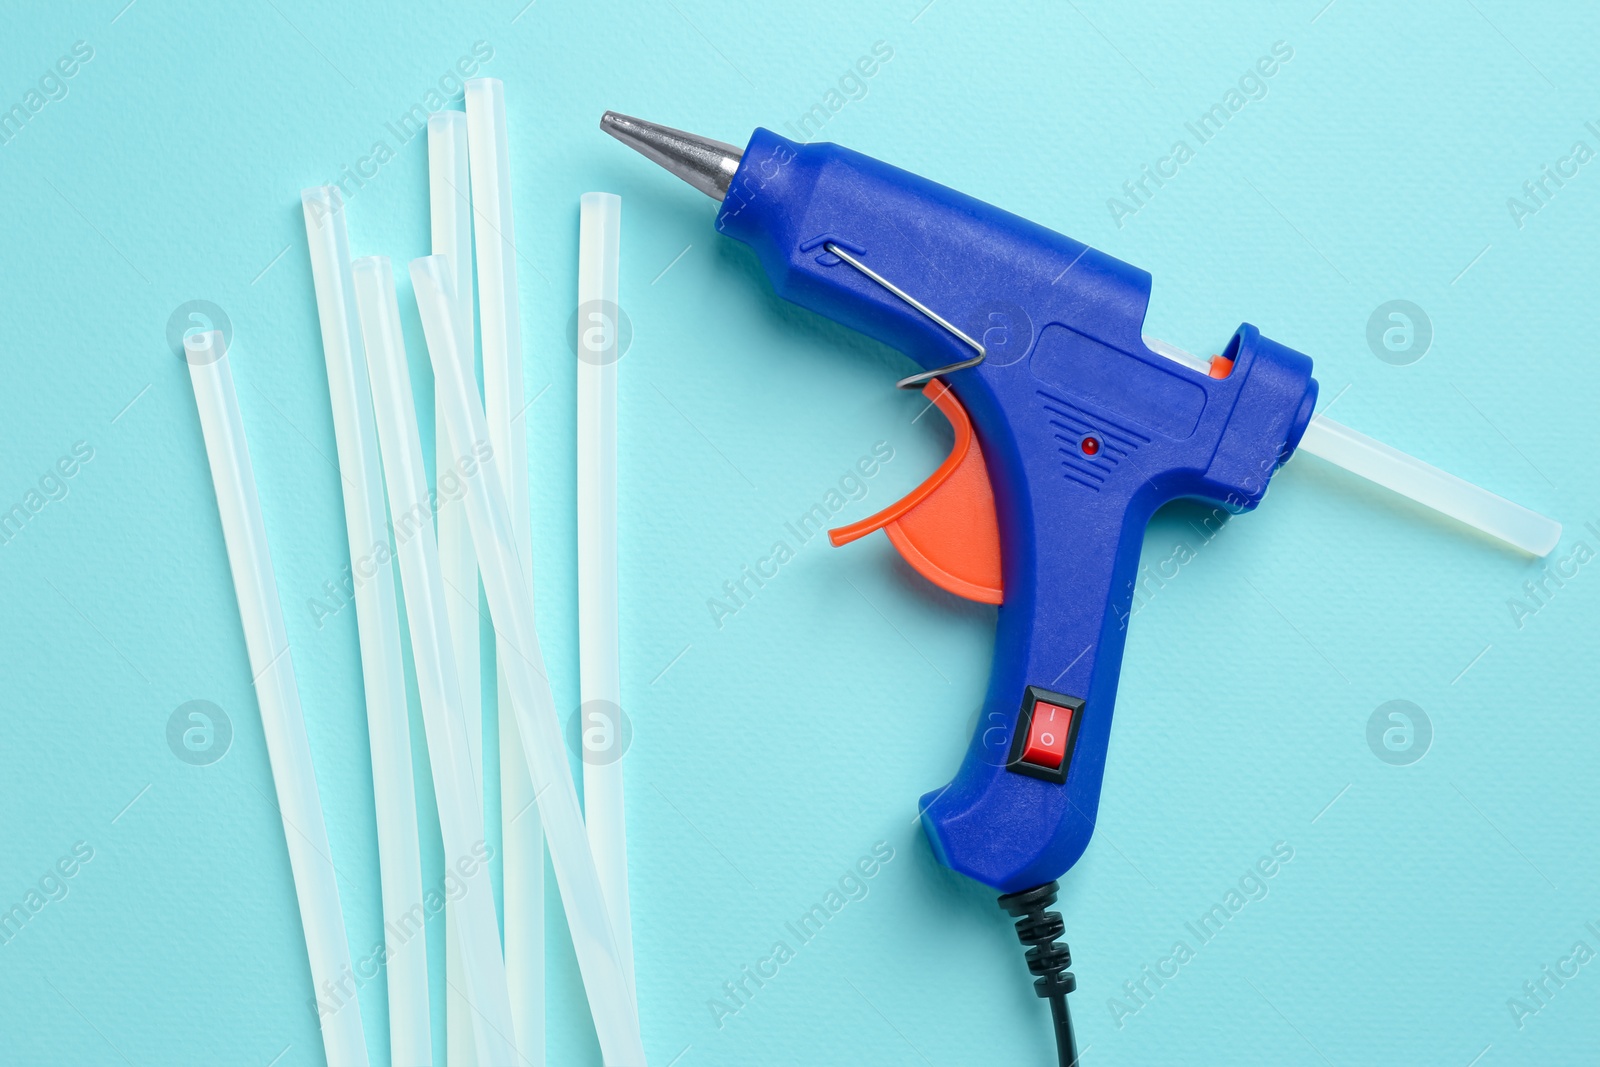 Photo of Blue glue gun and sticks on turquoise background, flat lay